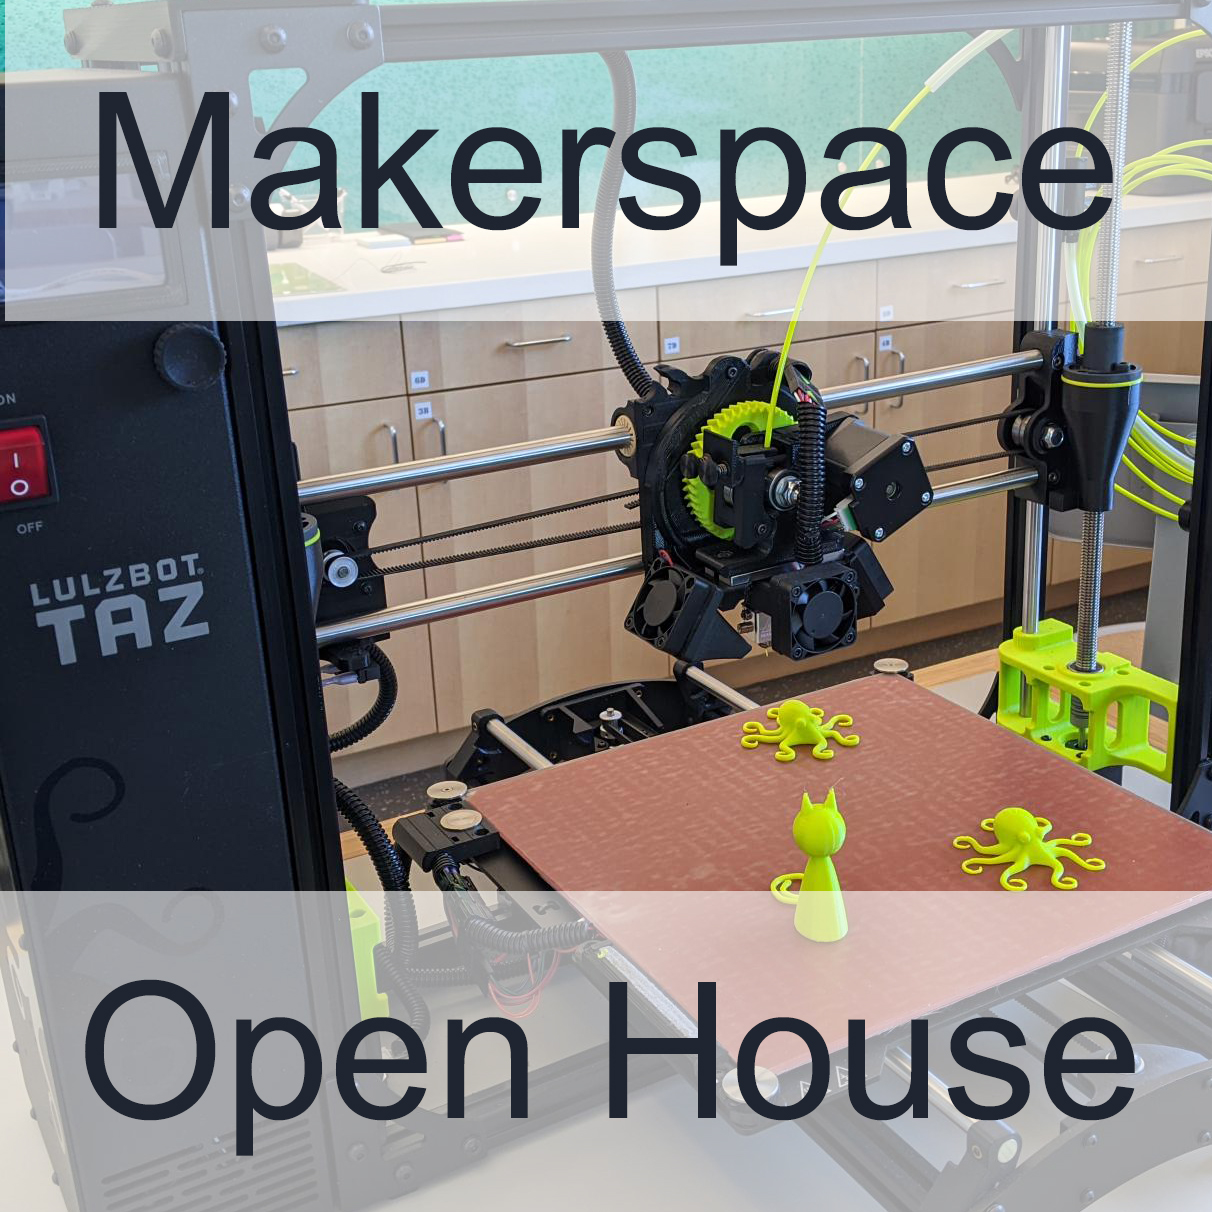 A Lulzbot TAZ 3D printer with fabricated figurines superimposed with the words Makerspace Open House